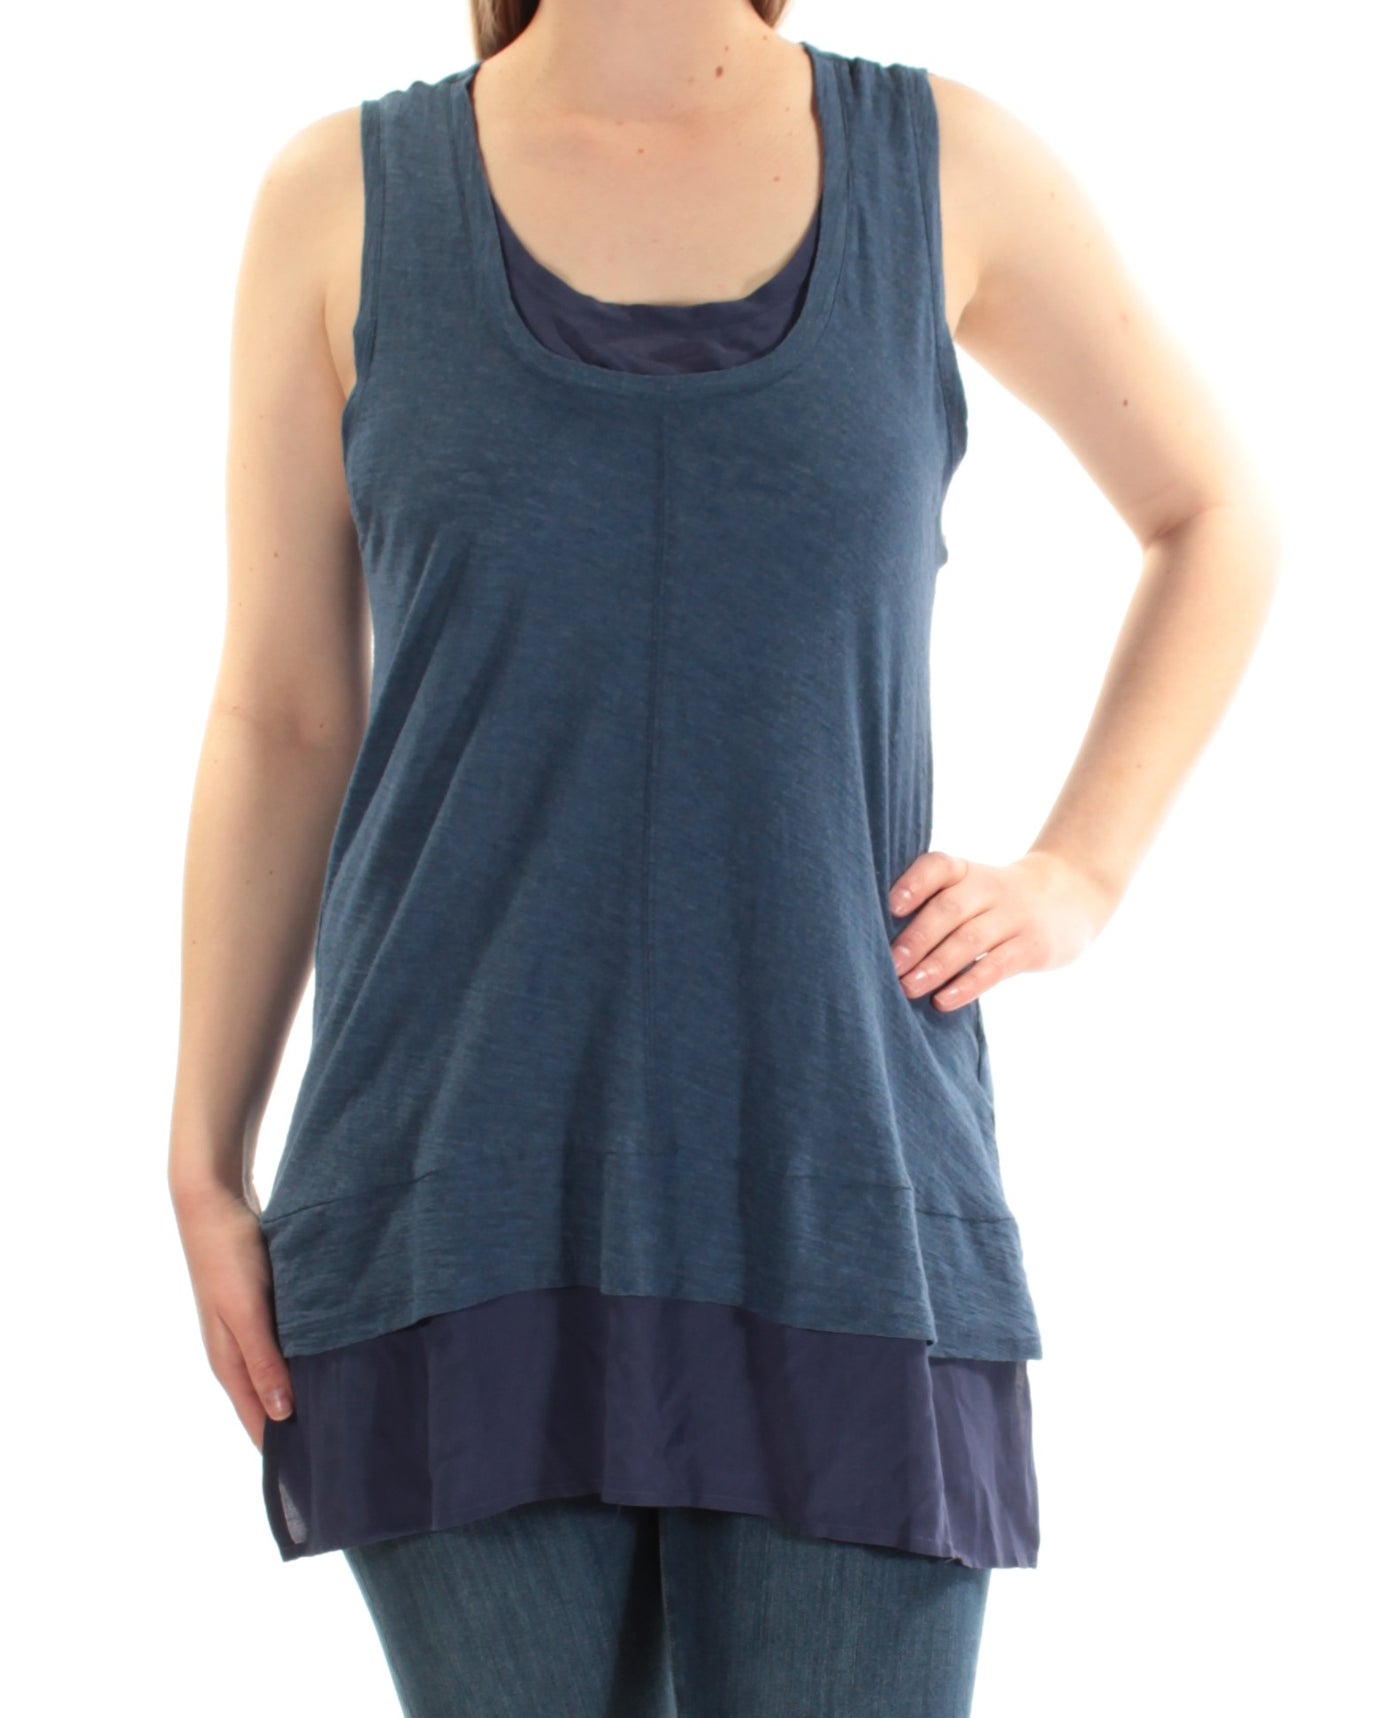 VINCE CAMUTO Womens Blue Sleeveless Scoop Neck Top